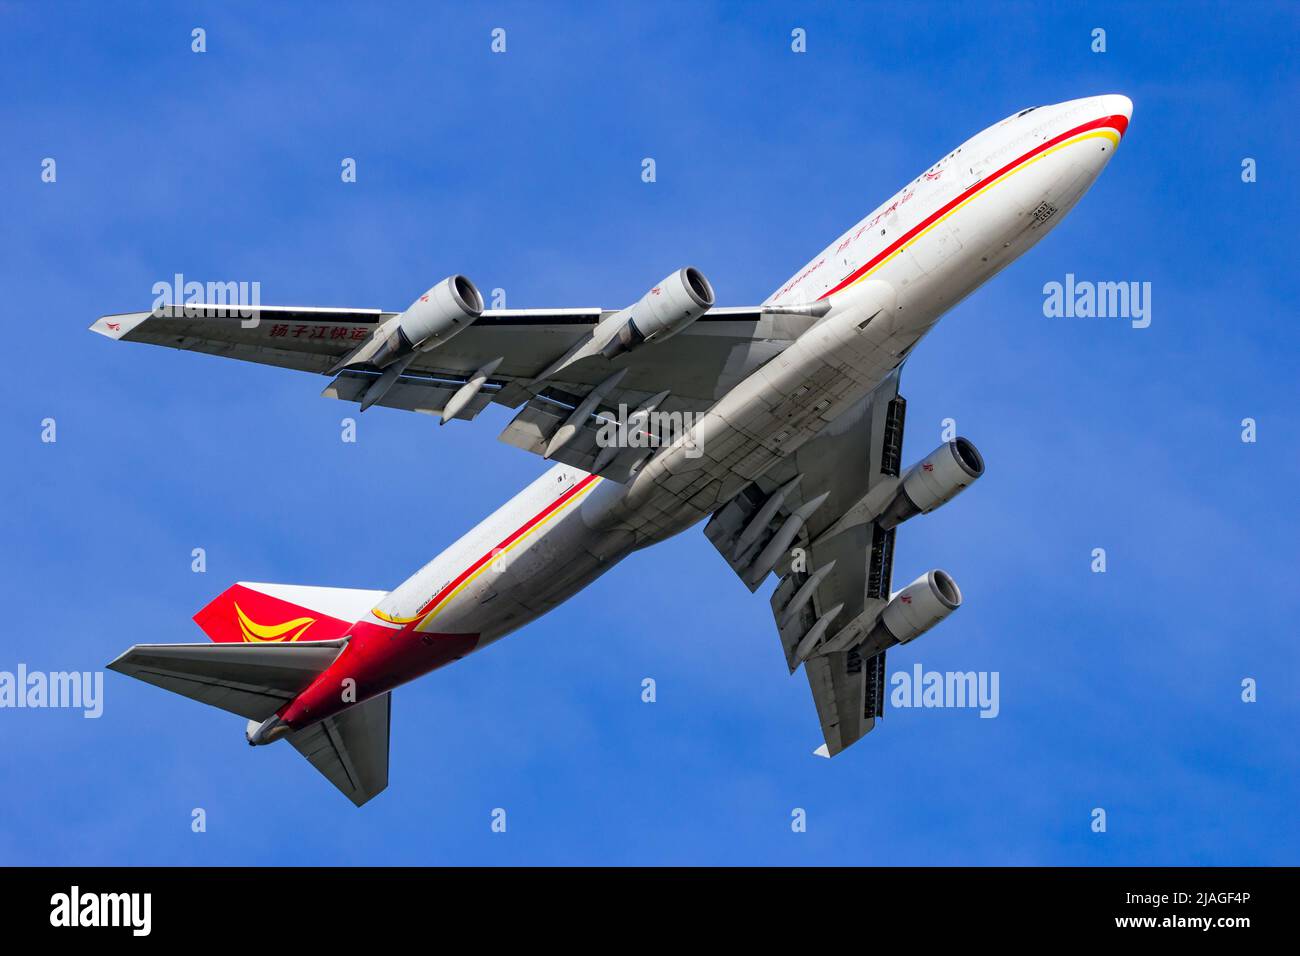 Yangtze River Airlines (now Suparna Airlines) Boeing 747 cargo plane taking off from Amsterdam-Schiphol Airport. The Netherlands - February 16, 2016 Stock Photo